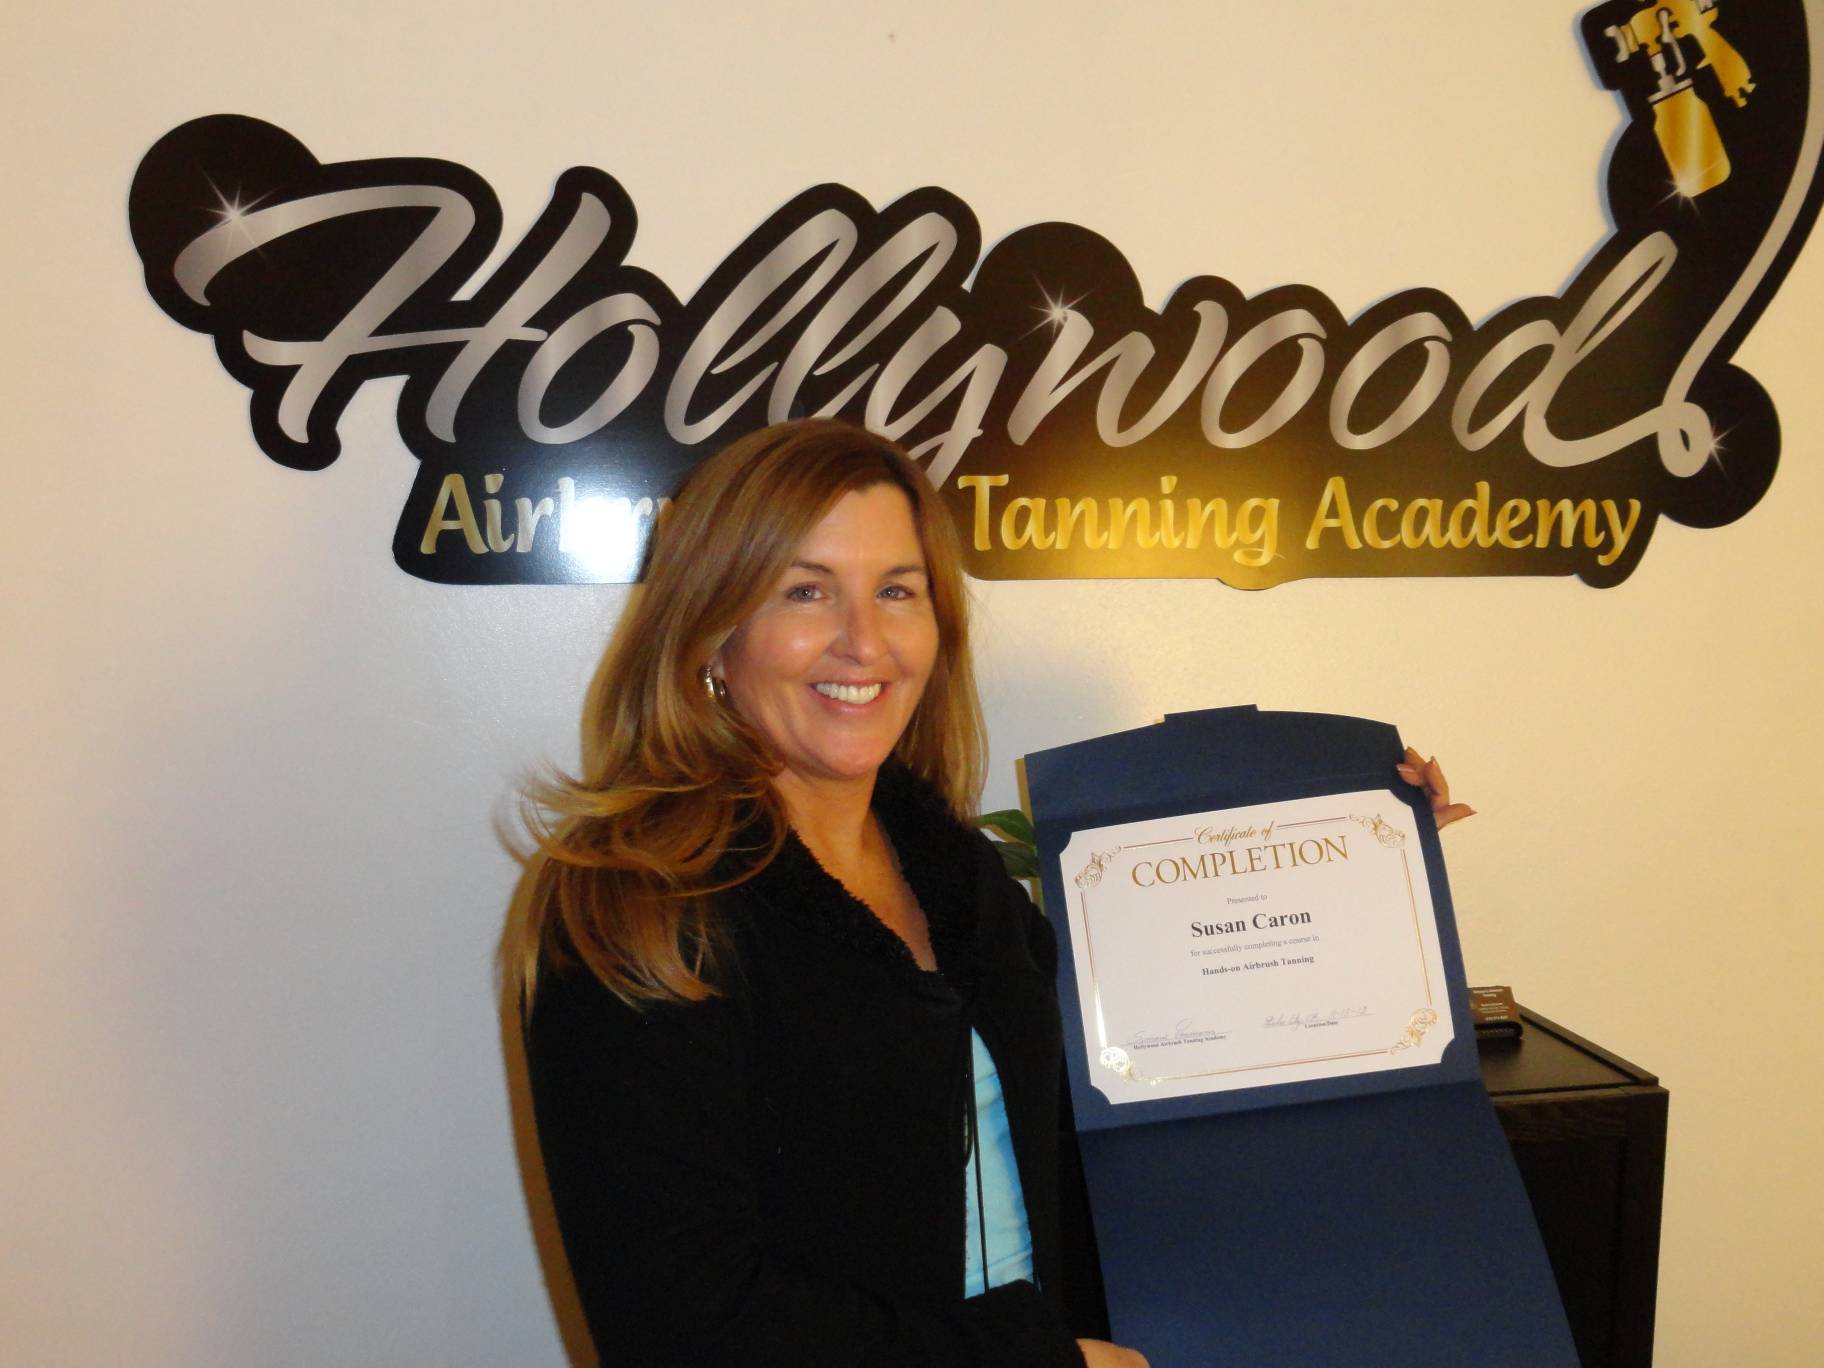 Tampa Based Experienced Airbrush Tanning Technician Susan Caron Becomes The Latest Graduate From The Hollywood Airbrush Tanning Academy